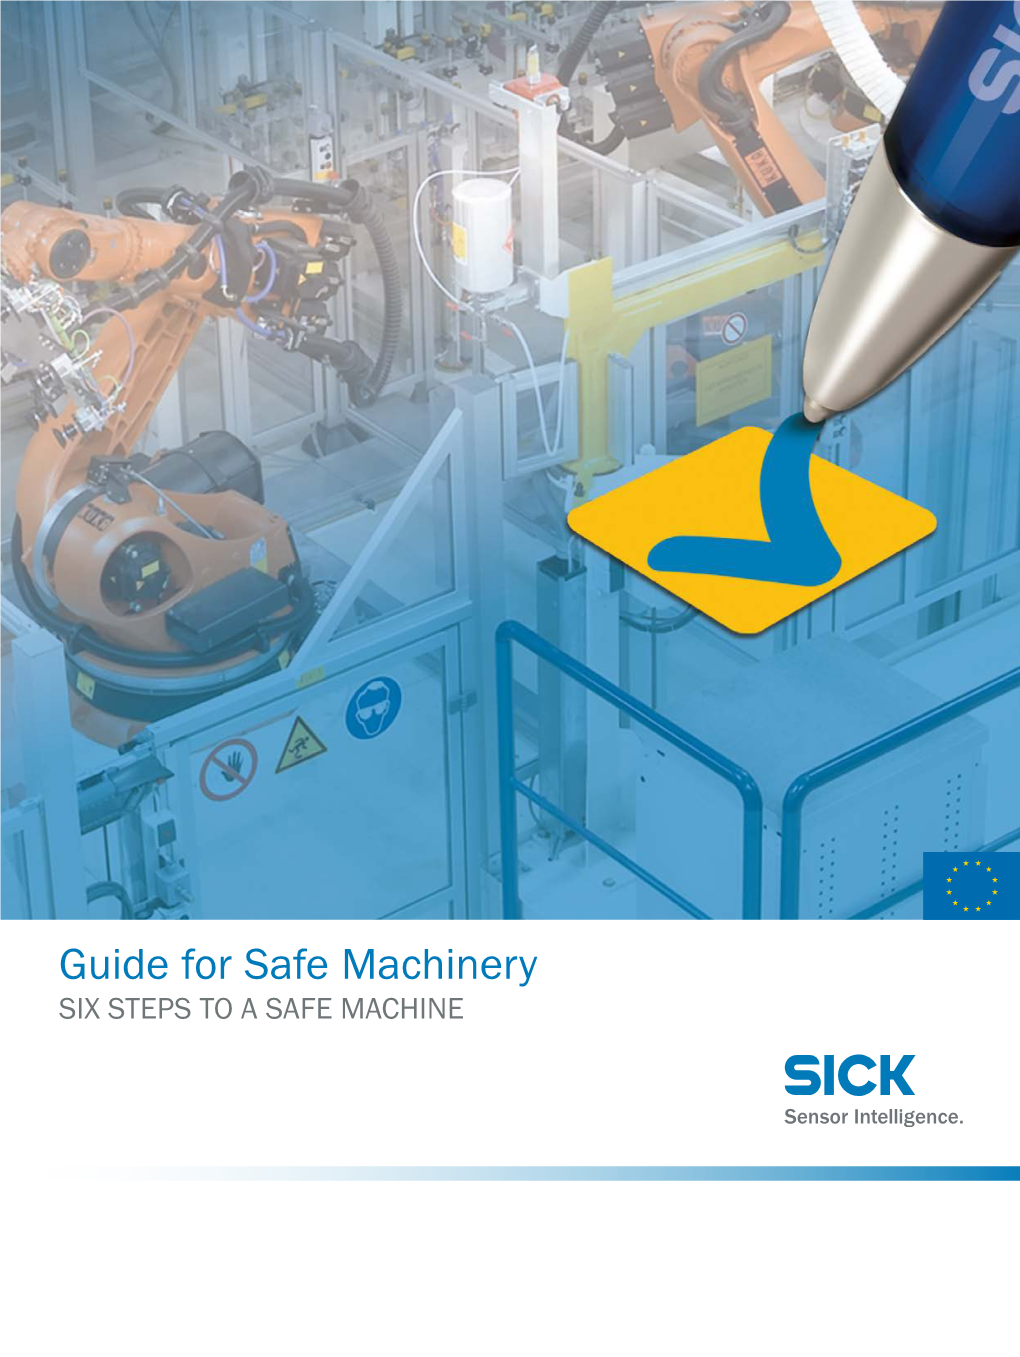 Guide for Safe Machinery SIX STEPS to a SAFE MACHINE CONTENTS Subject to Change Without Notice Six Steps to a Safe Machine GUIDE for SAFE MACHINERY